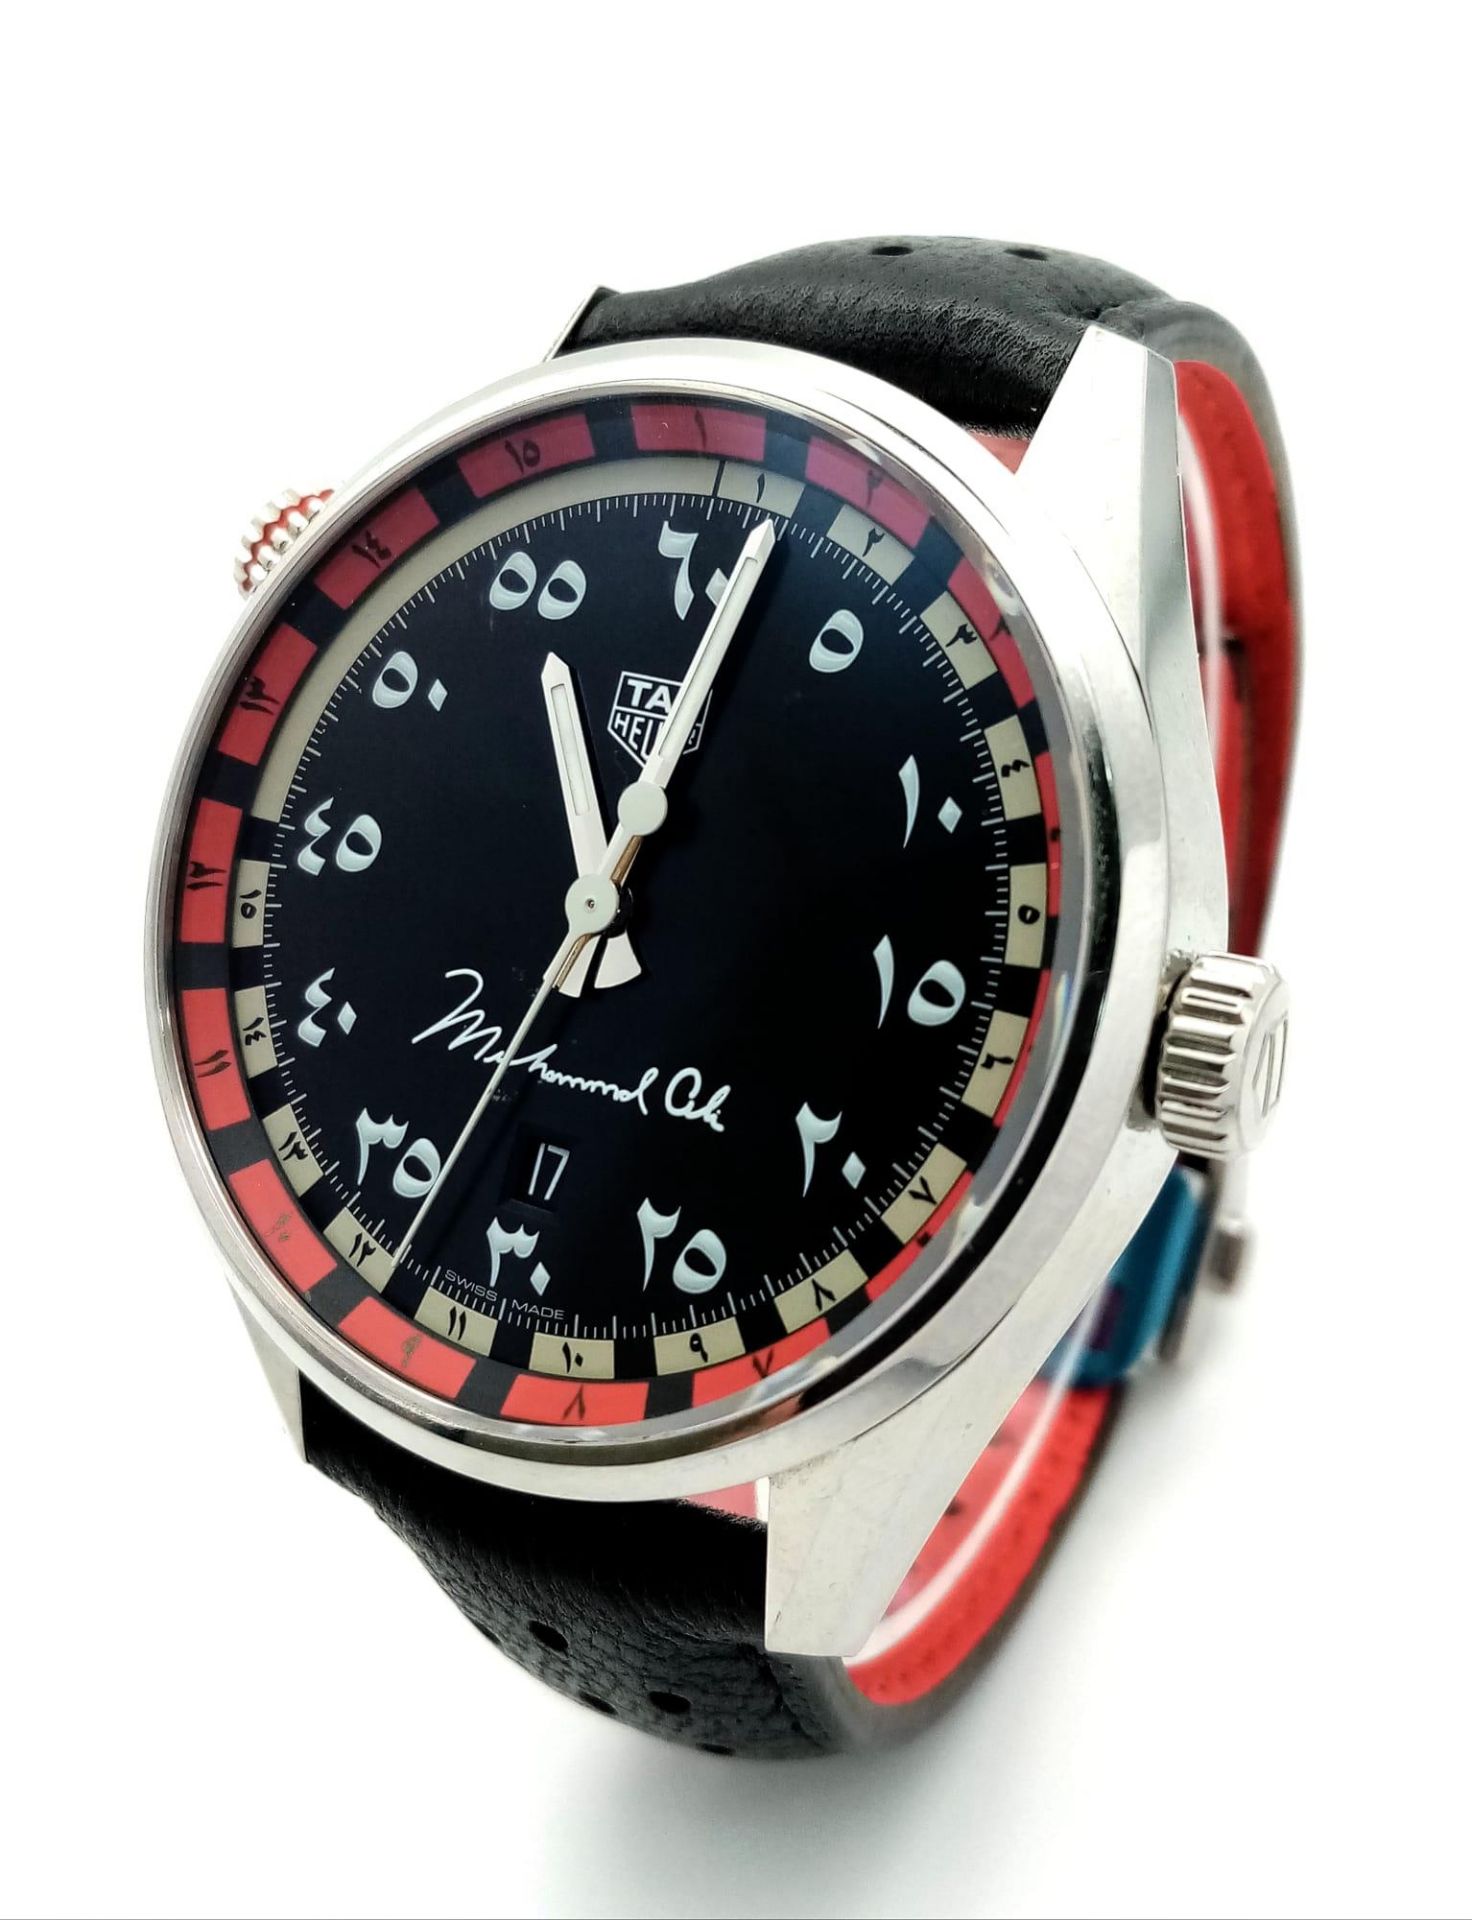 A TAG HEUER CARRERA LIMITED EDITION (MUHAMMED ALI) WATCH WITH ARABIC NUMERALS AND ON THE ORIGINAL - Image 2 of 7